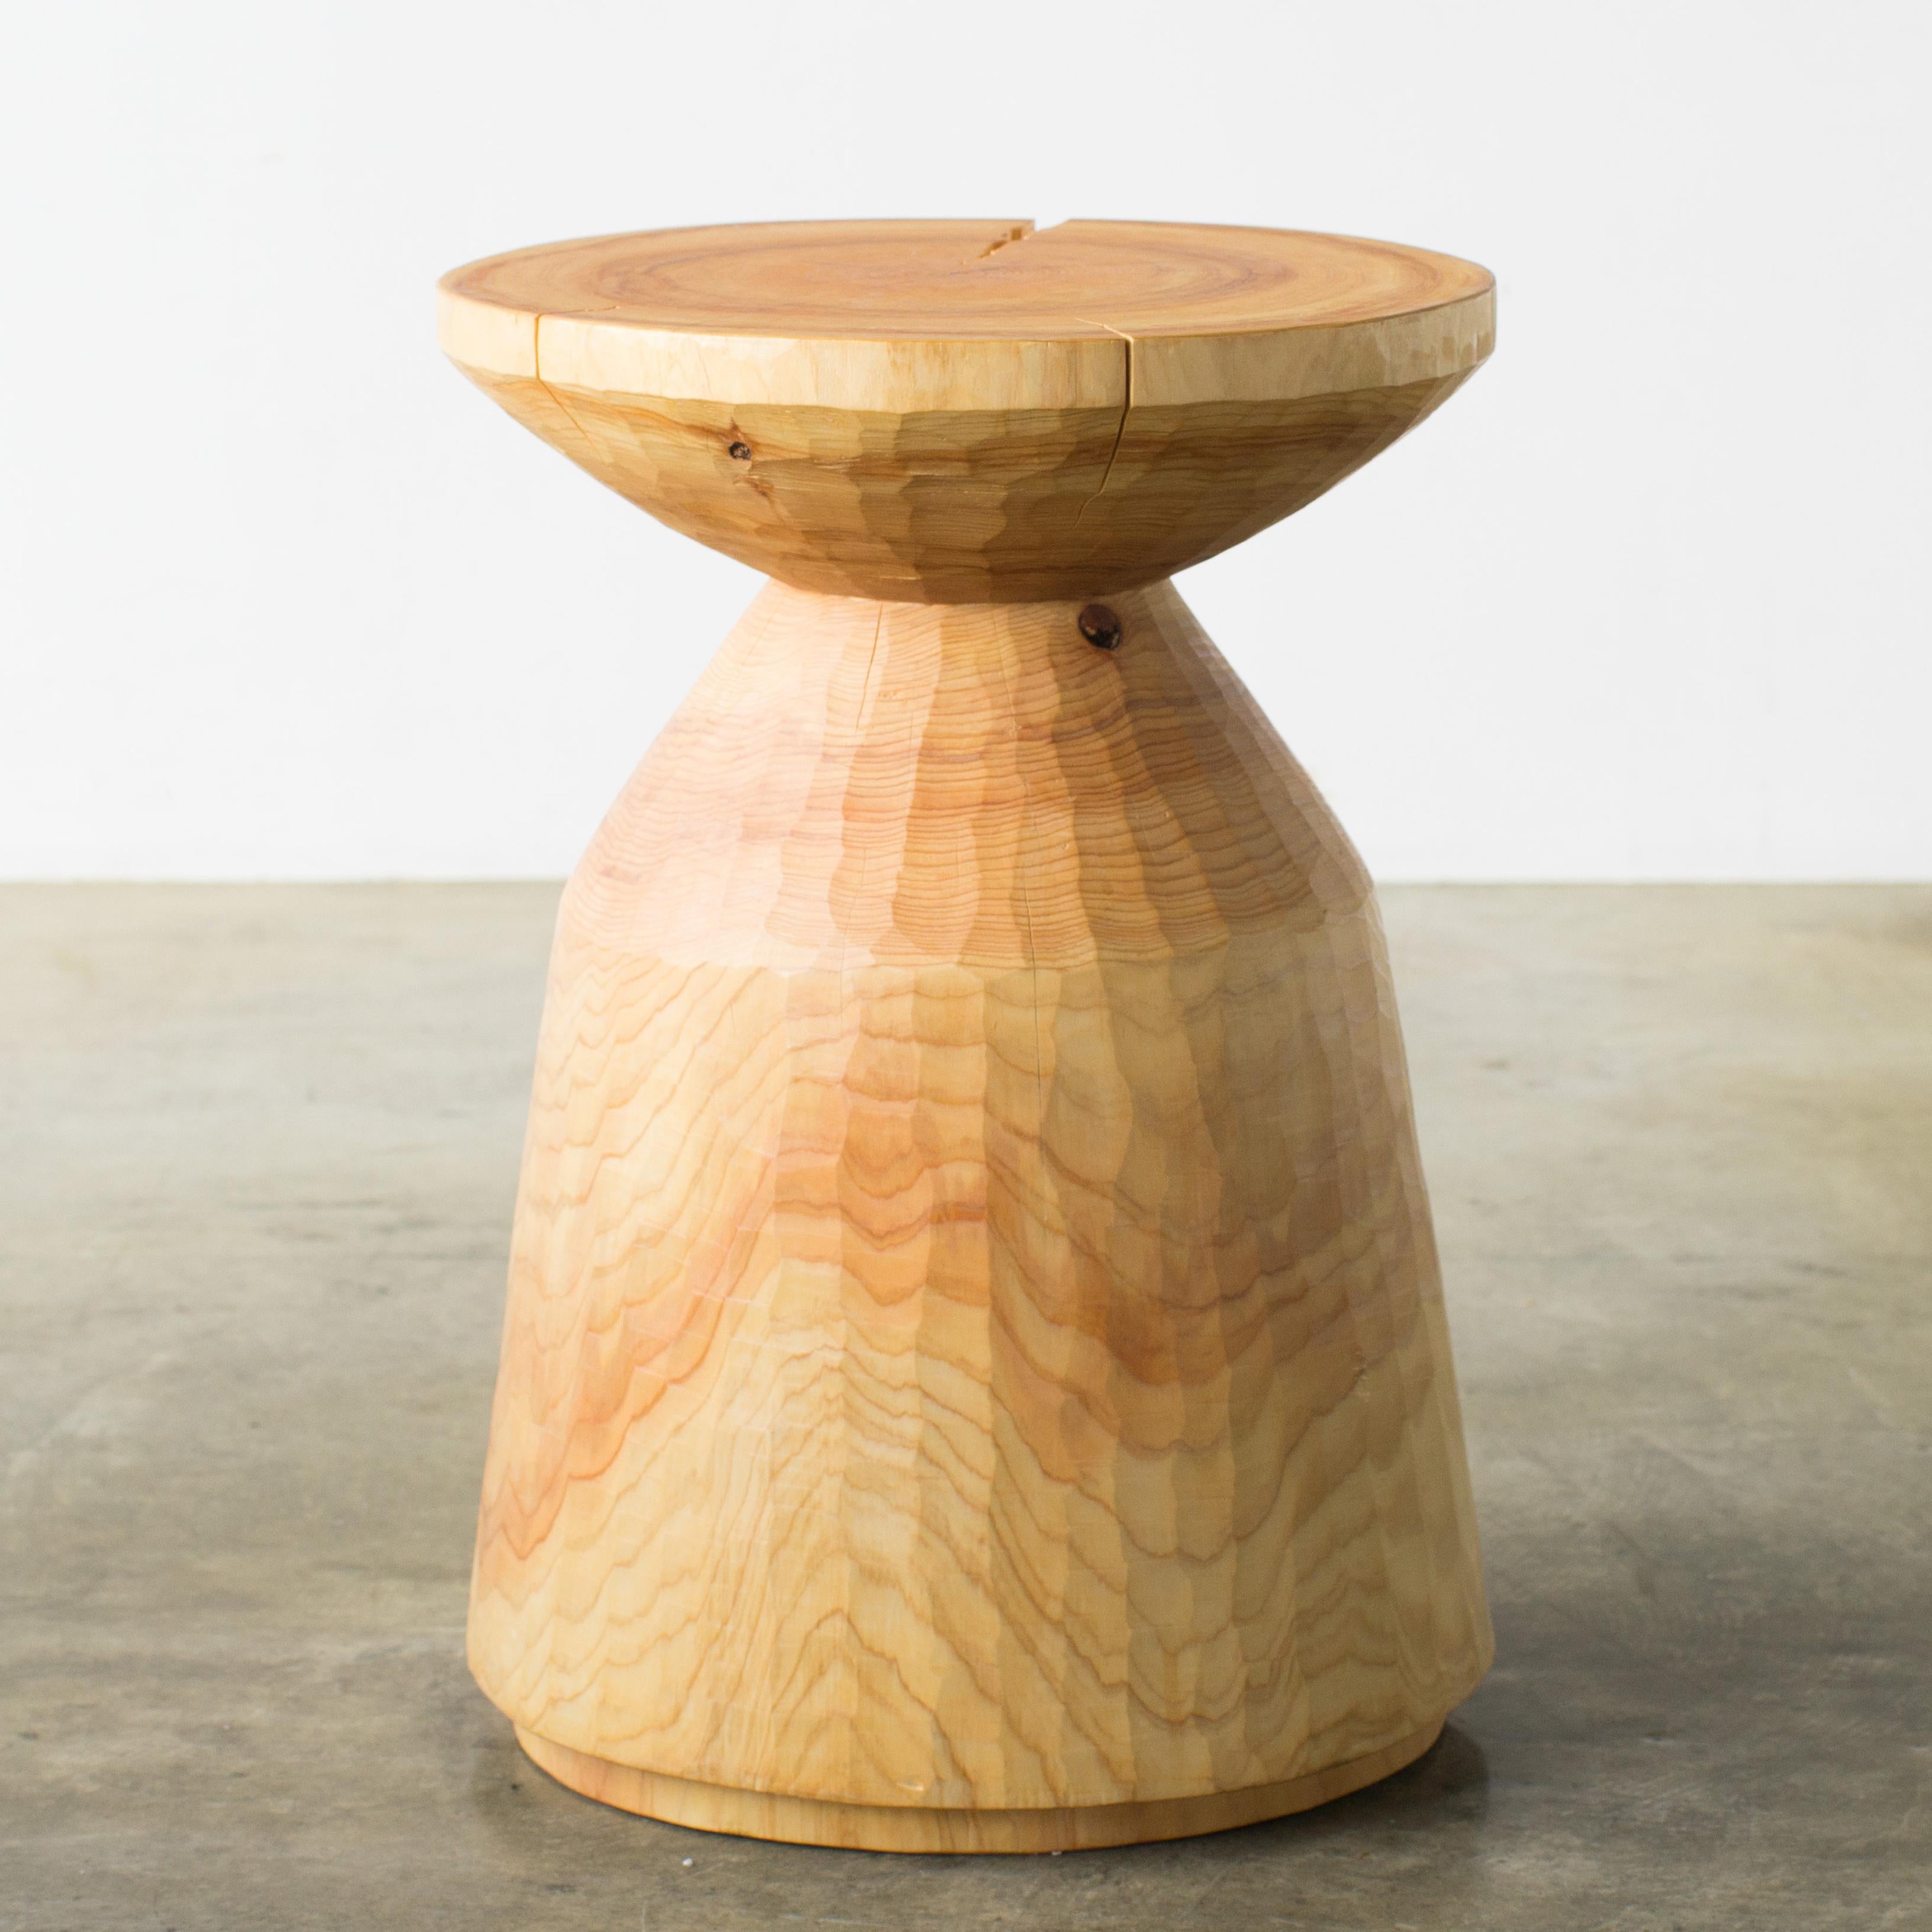 Hand-Carved Hiroyuki Nishimura and Zogei Furniture Sculptural Stool19 Tribal Glamping For Sale